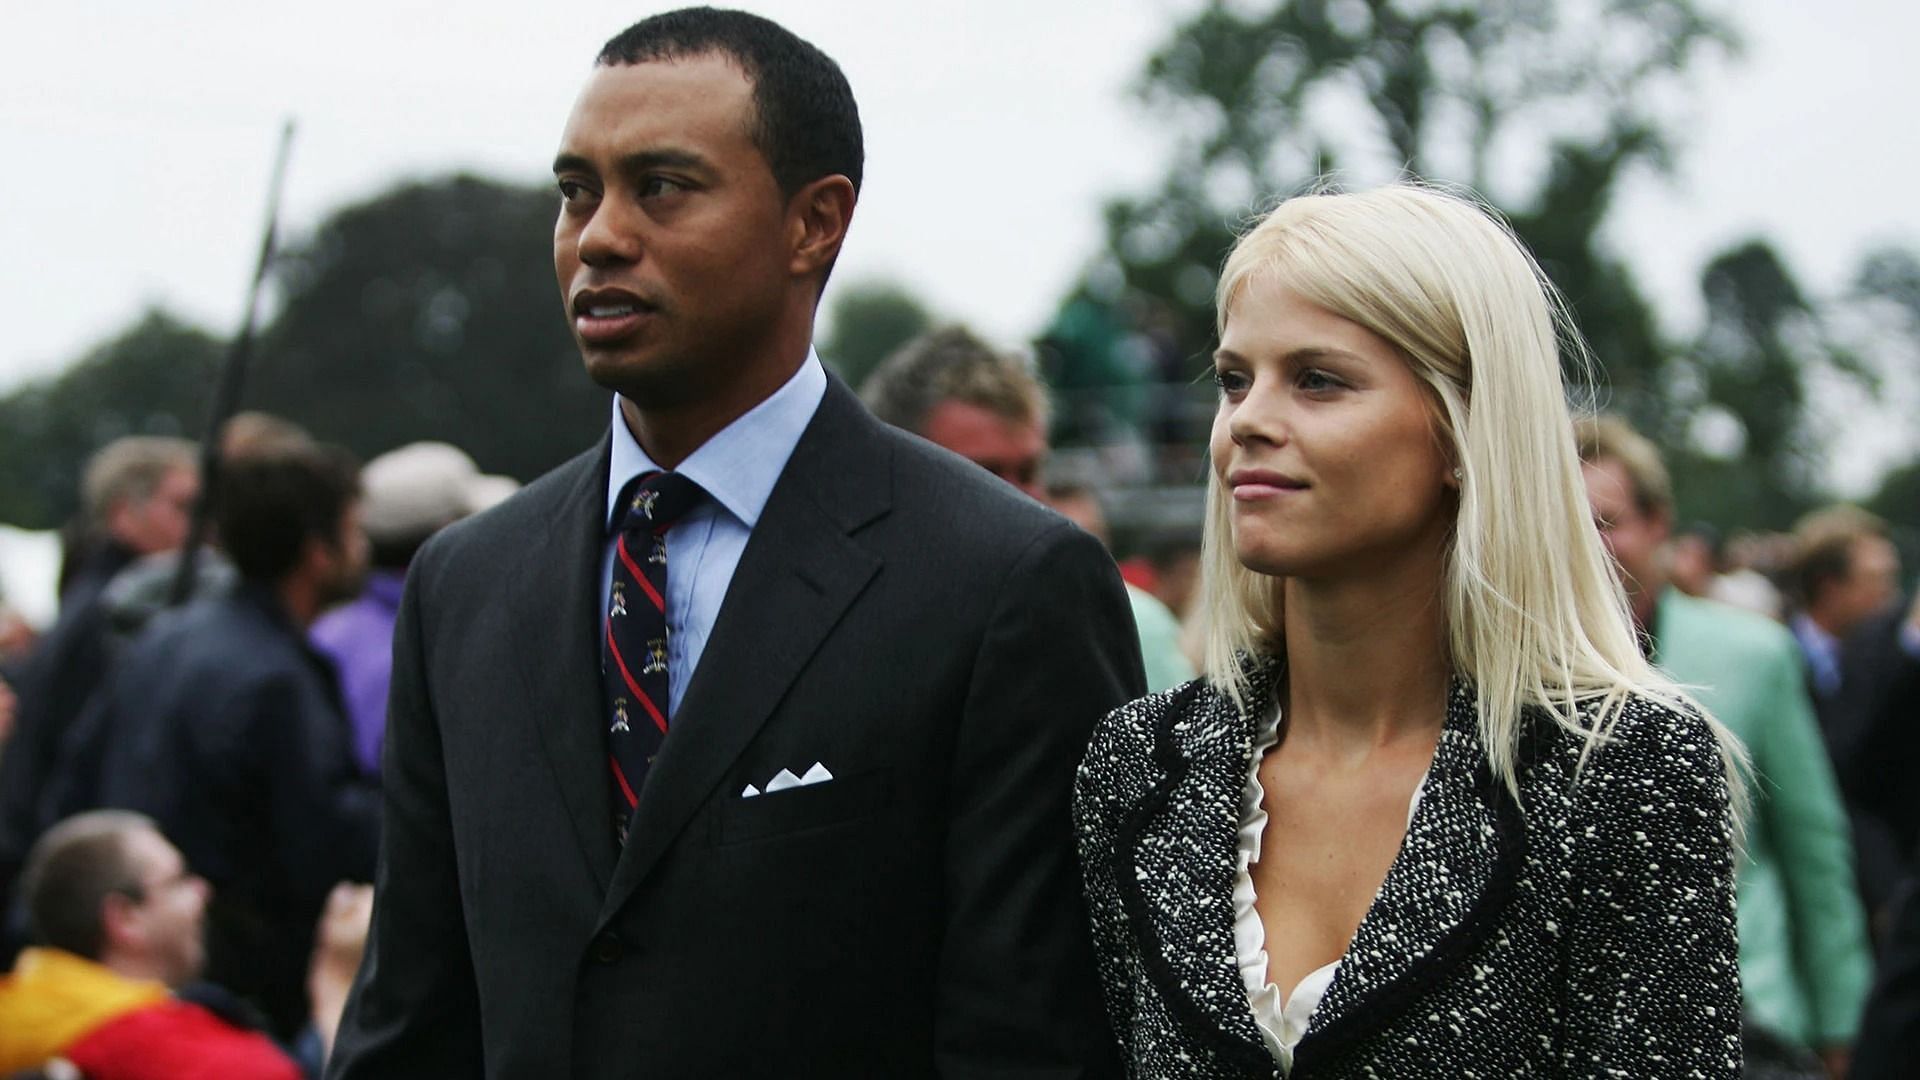 Tiger Woods was married to model Elin Nordegren from 2004 to 2010